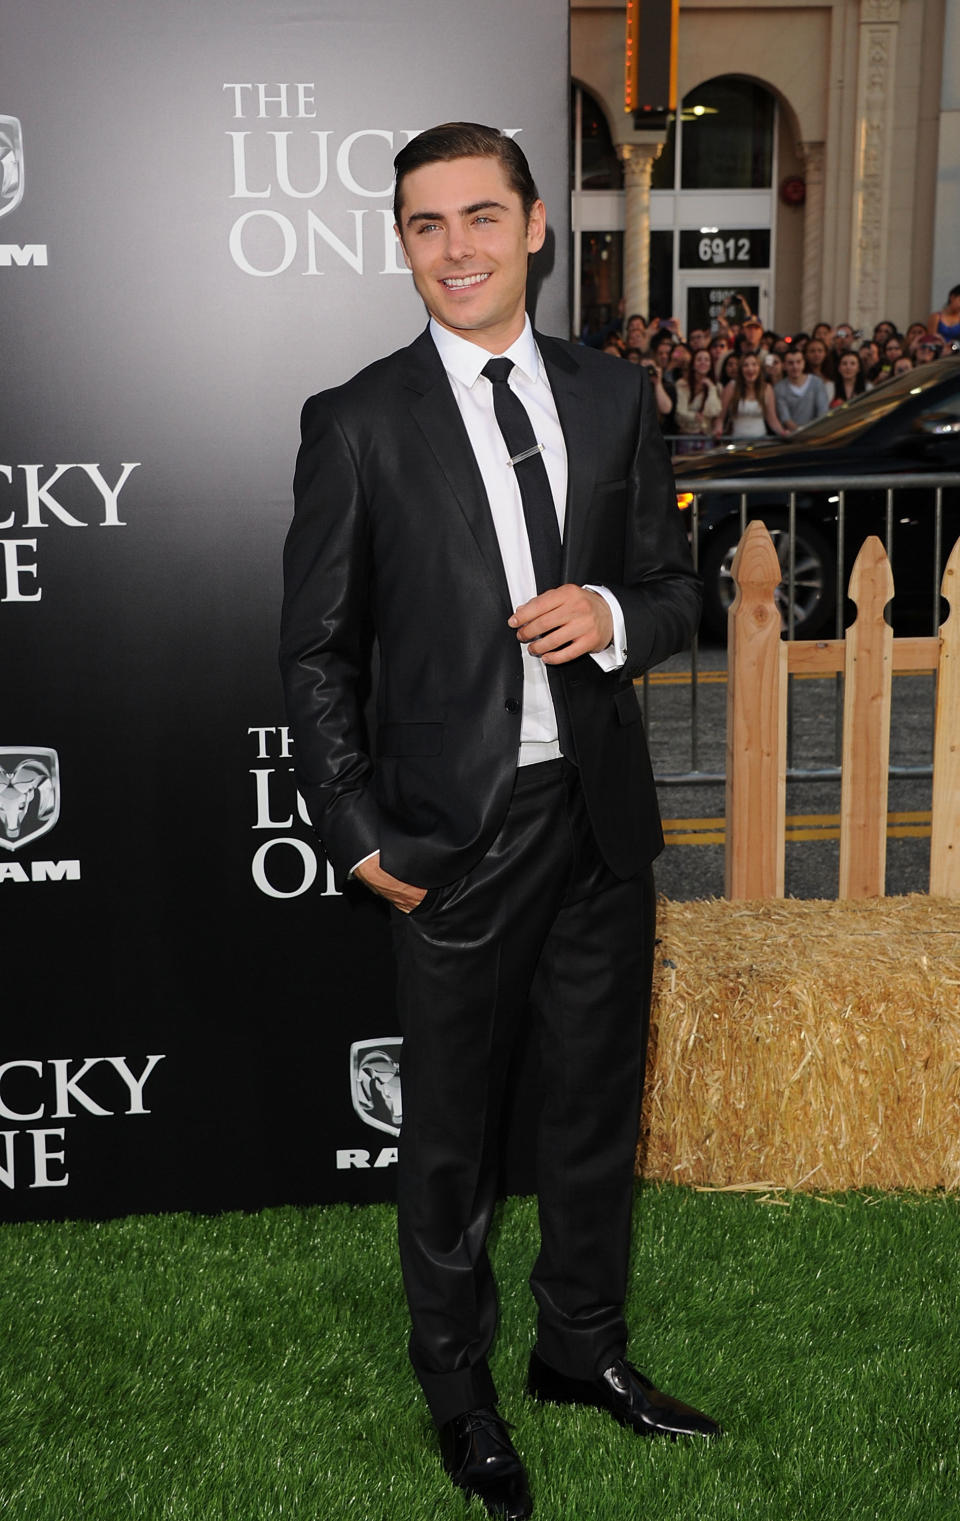 Premiere Of Warner Bros. Pictures' "The Lucky One" - Arrivals